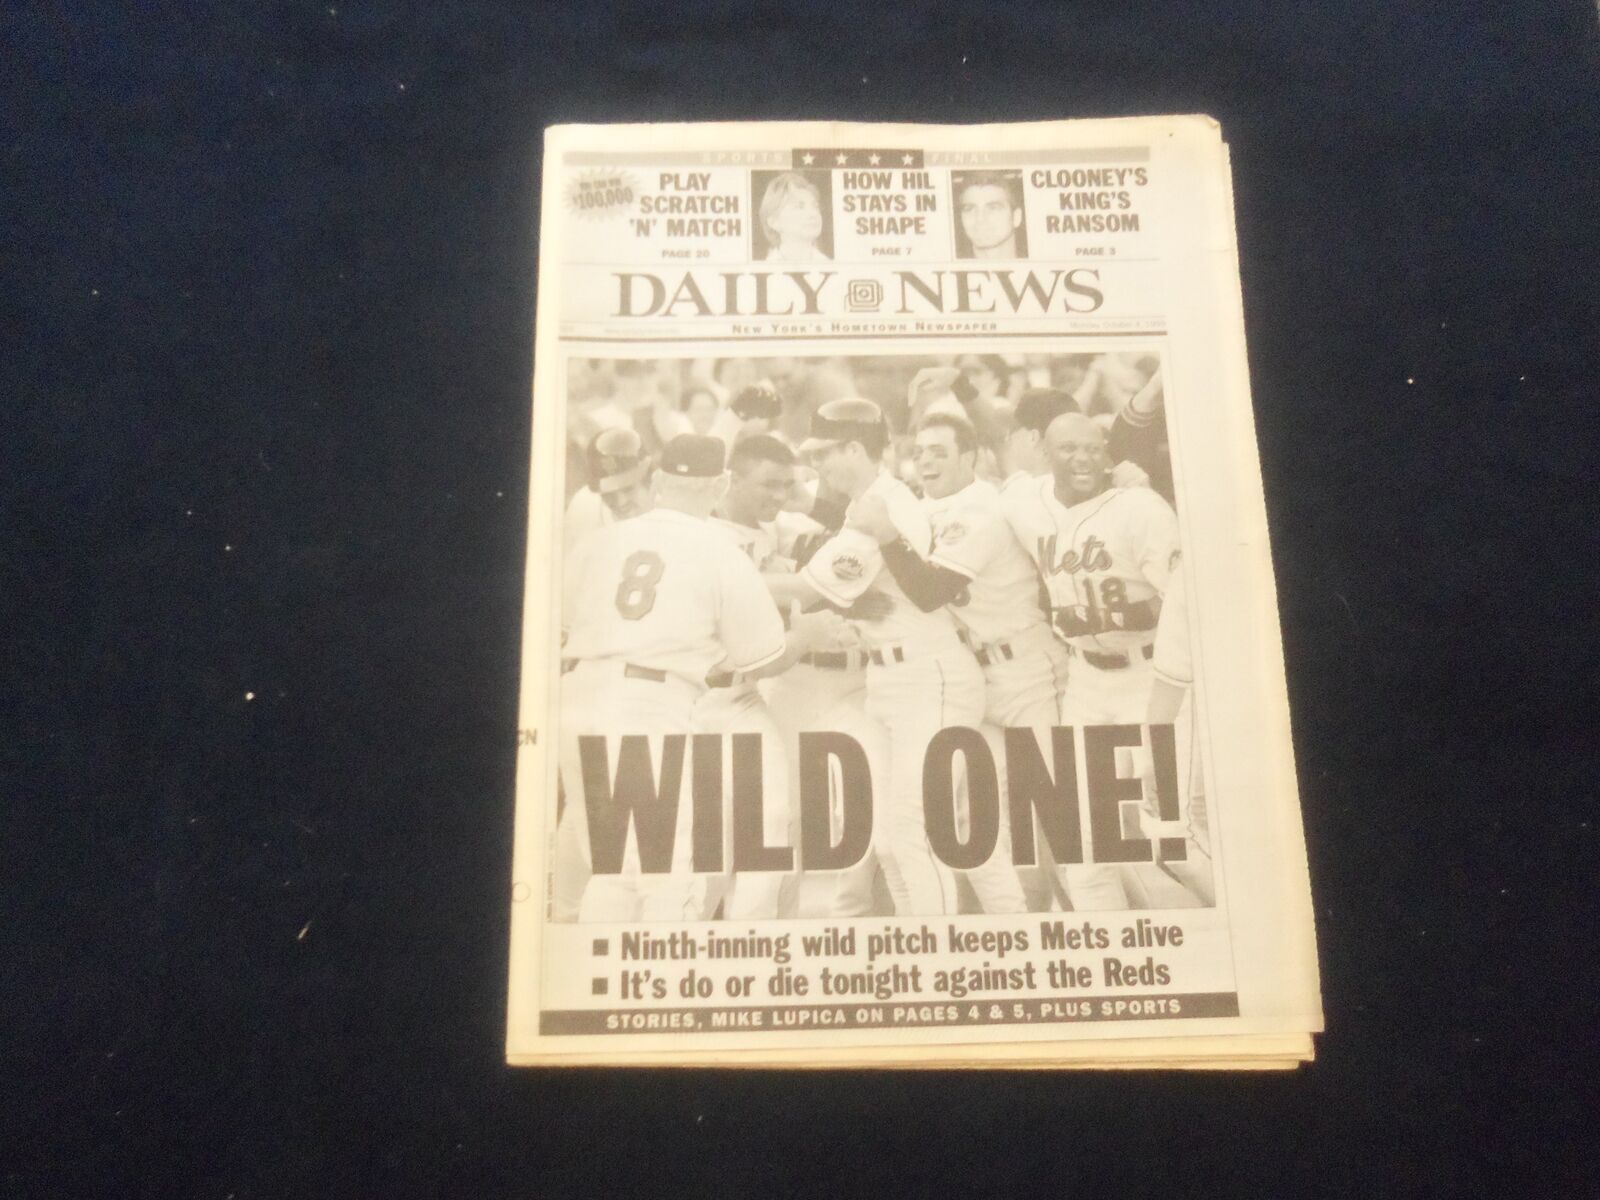 1999 OCT 4 NEW YORK DAILY NEWS NEWSPAPER - N.Y. METS VS. REDS WILD CARD- NP 6057